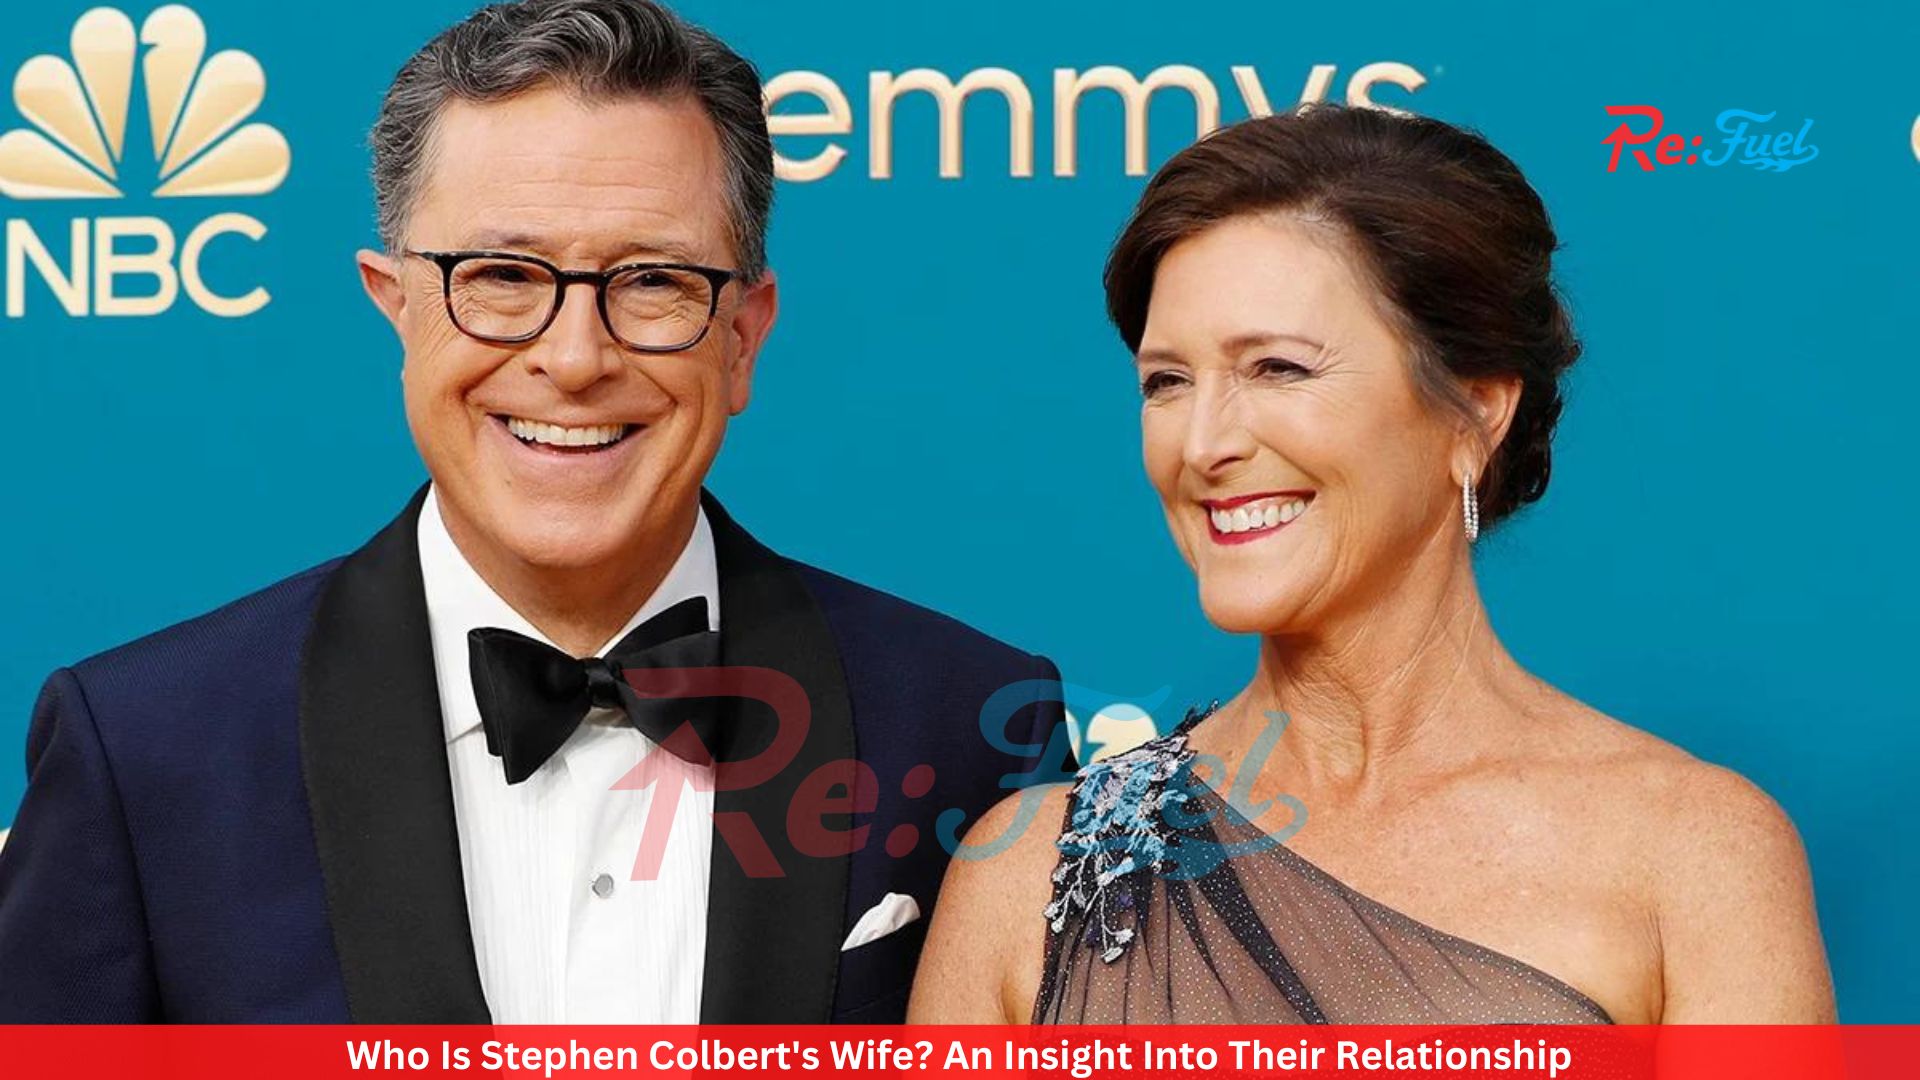 Who Is Stephen Colbert's Wife? An Insight Into Their Relationship